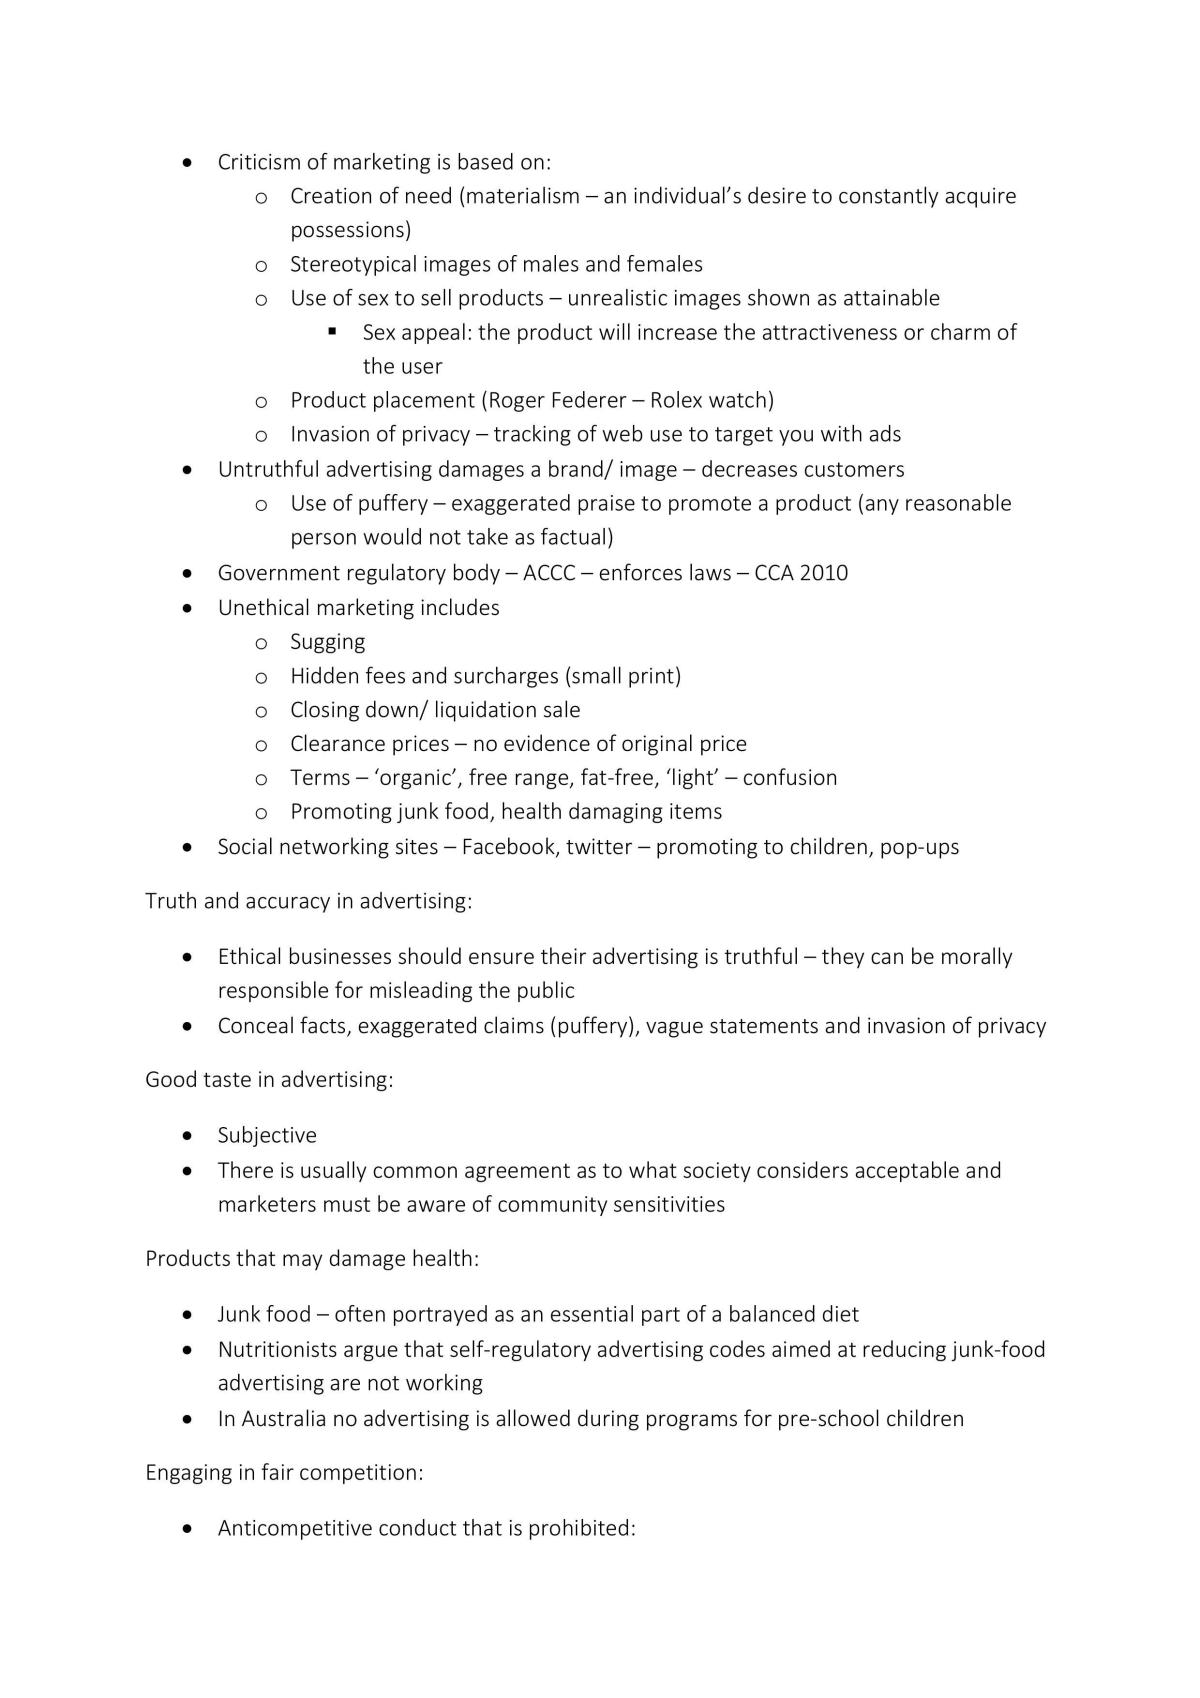 Marketing Notes Complete | Business Studies - Year 12 HSC | Thinkswap